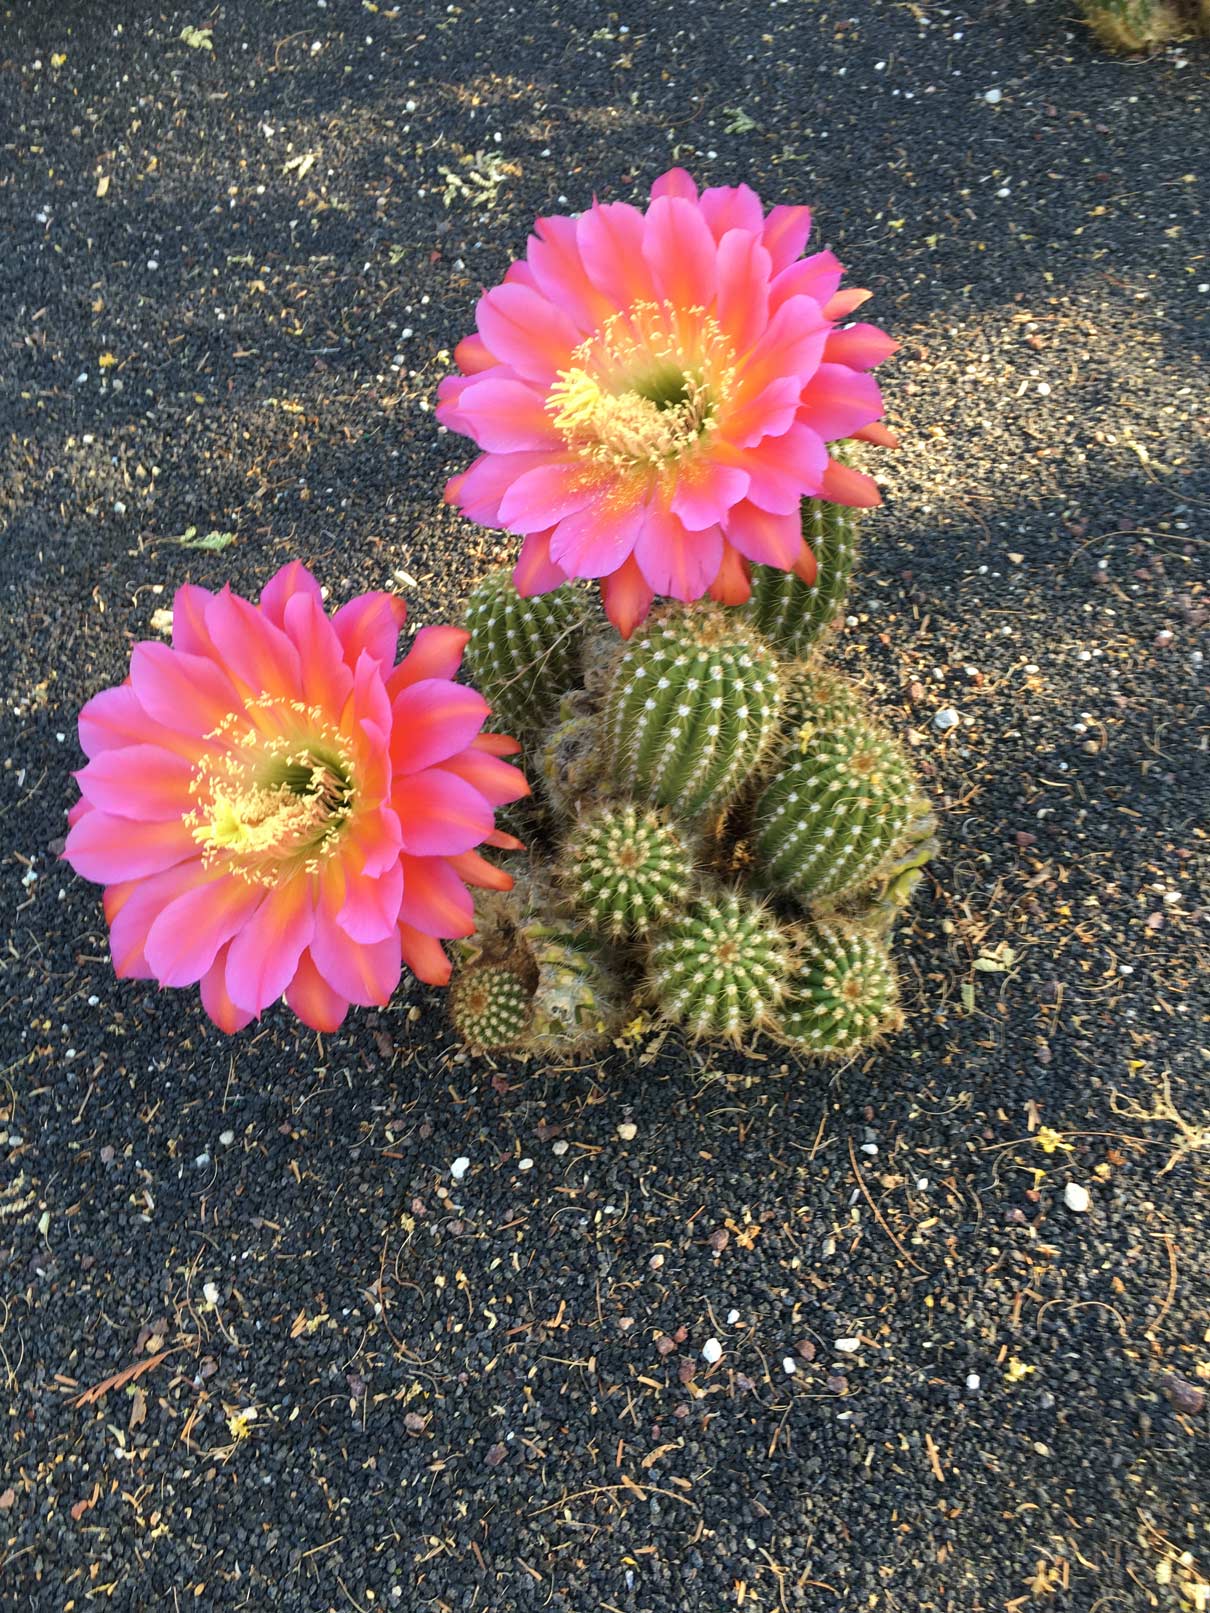 A small Torch Cactus shows off two bright pink blooms.